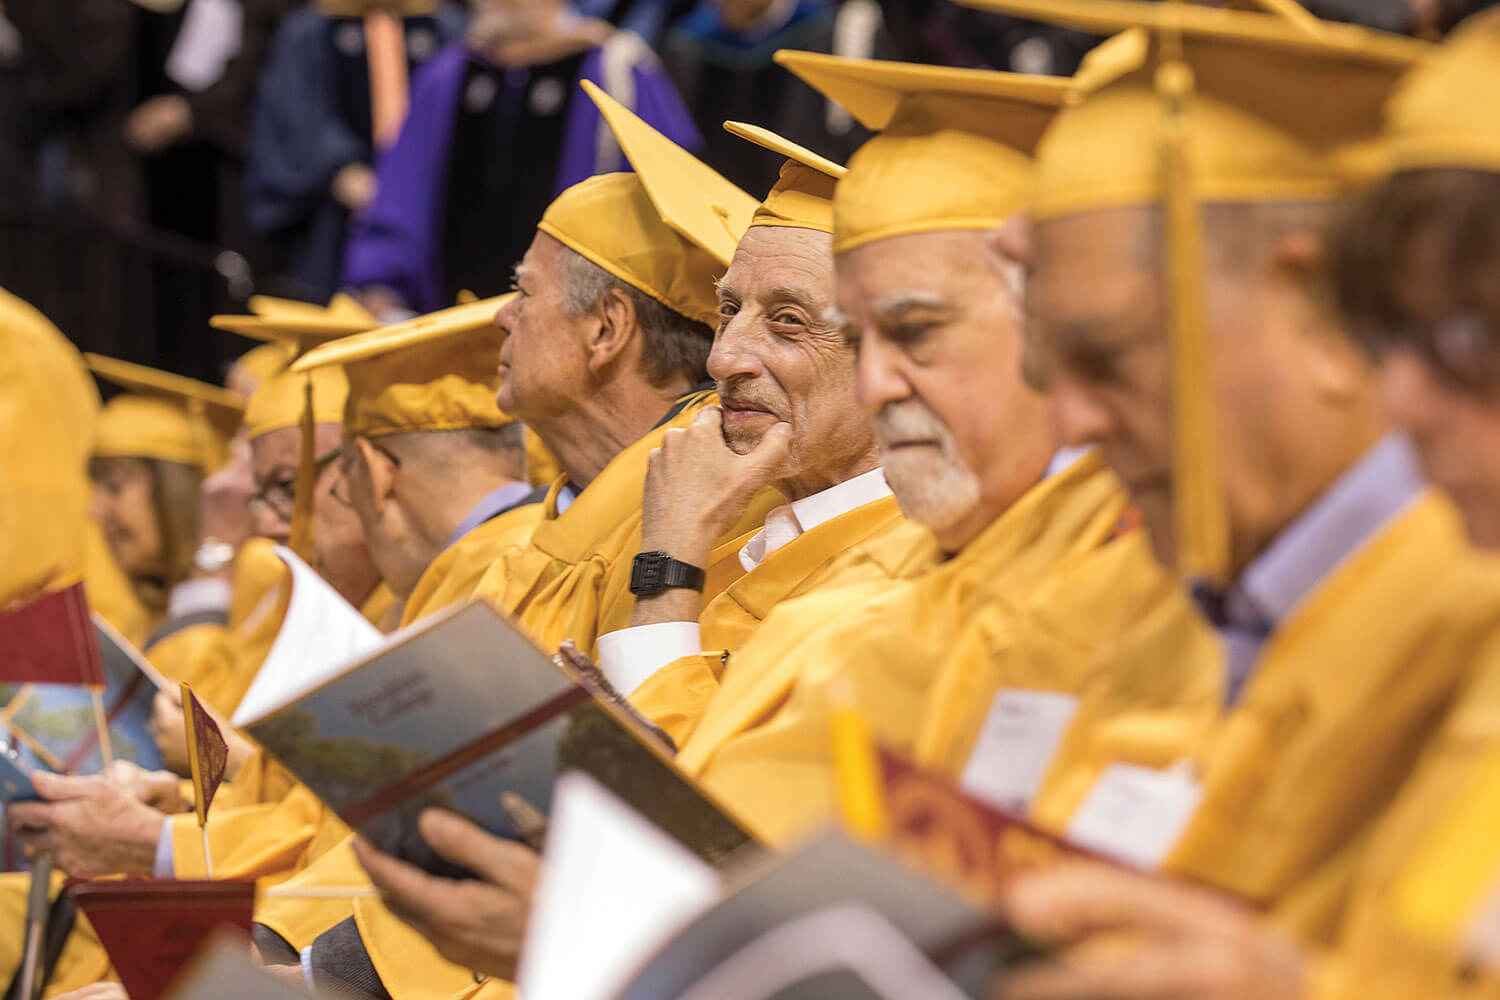 2019 Commencement Ceremony, May 30, 2019. Members of the 50th Anniversary Class